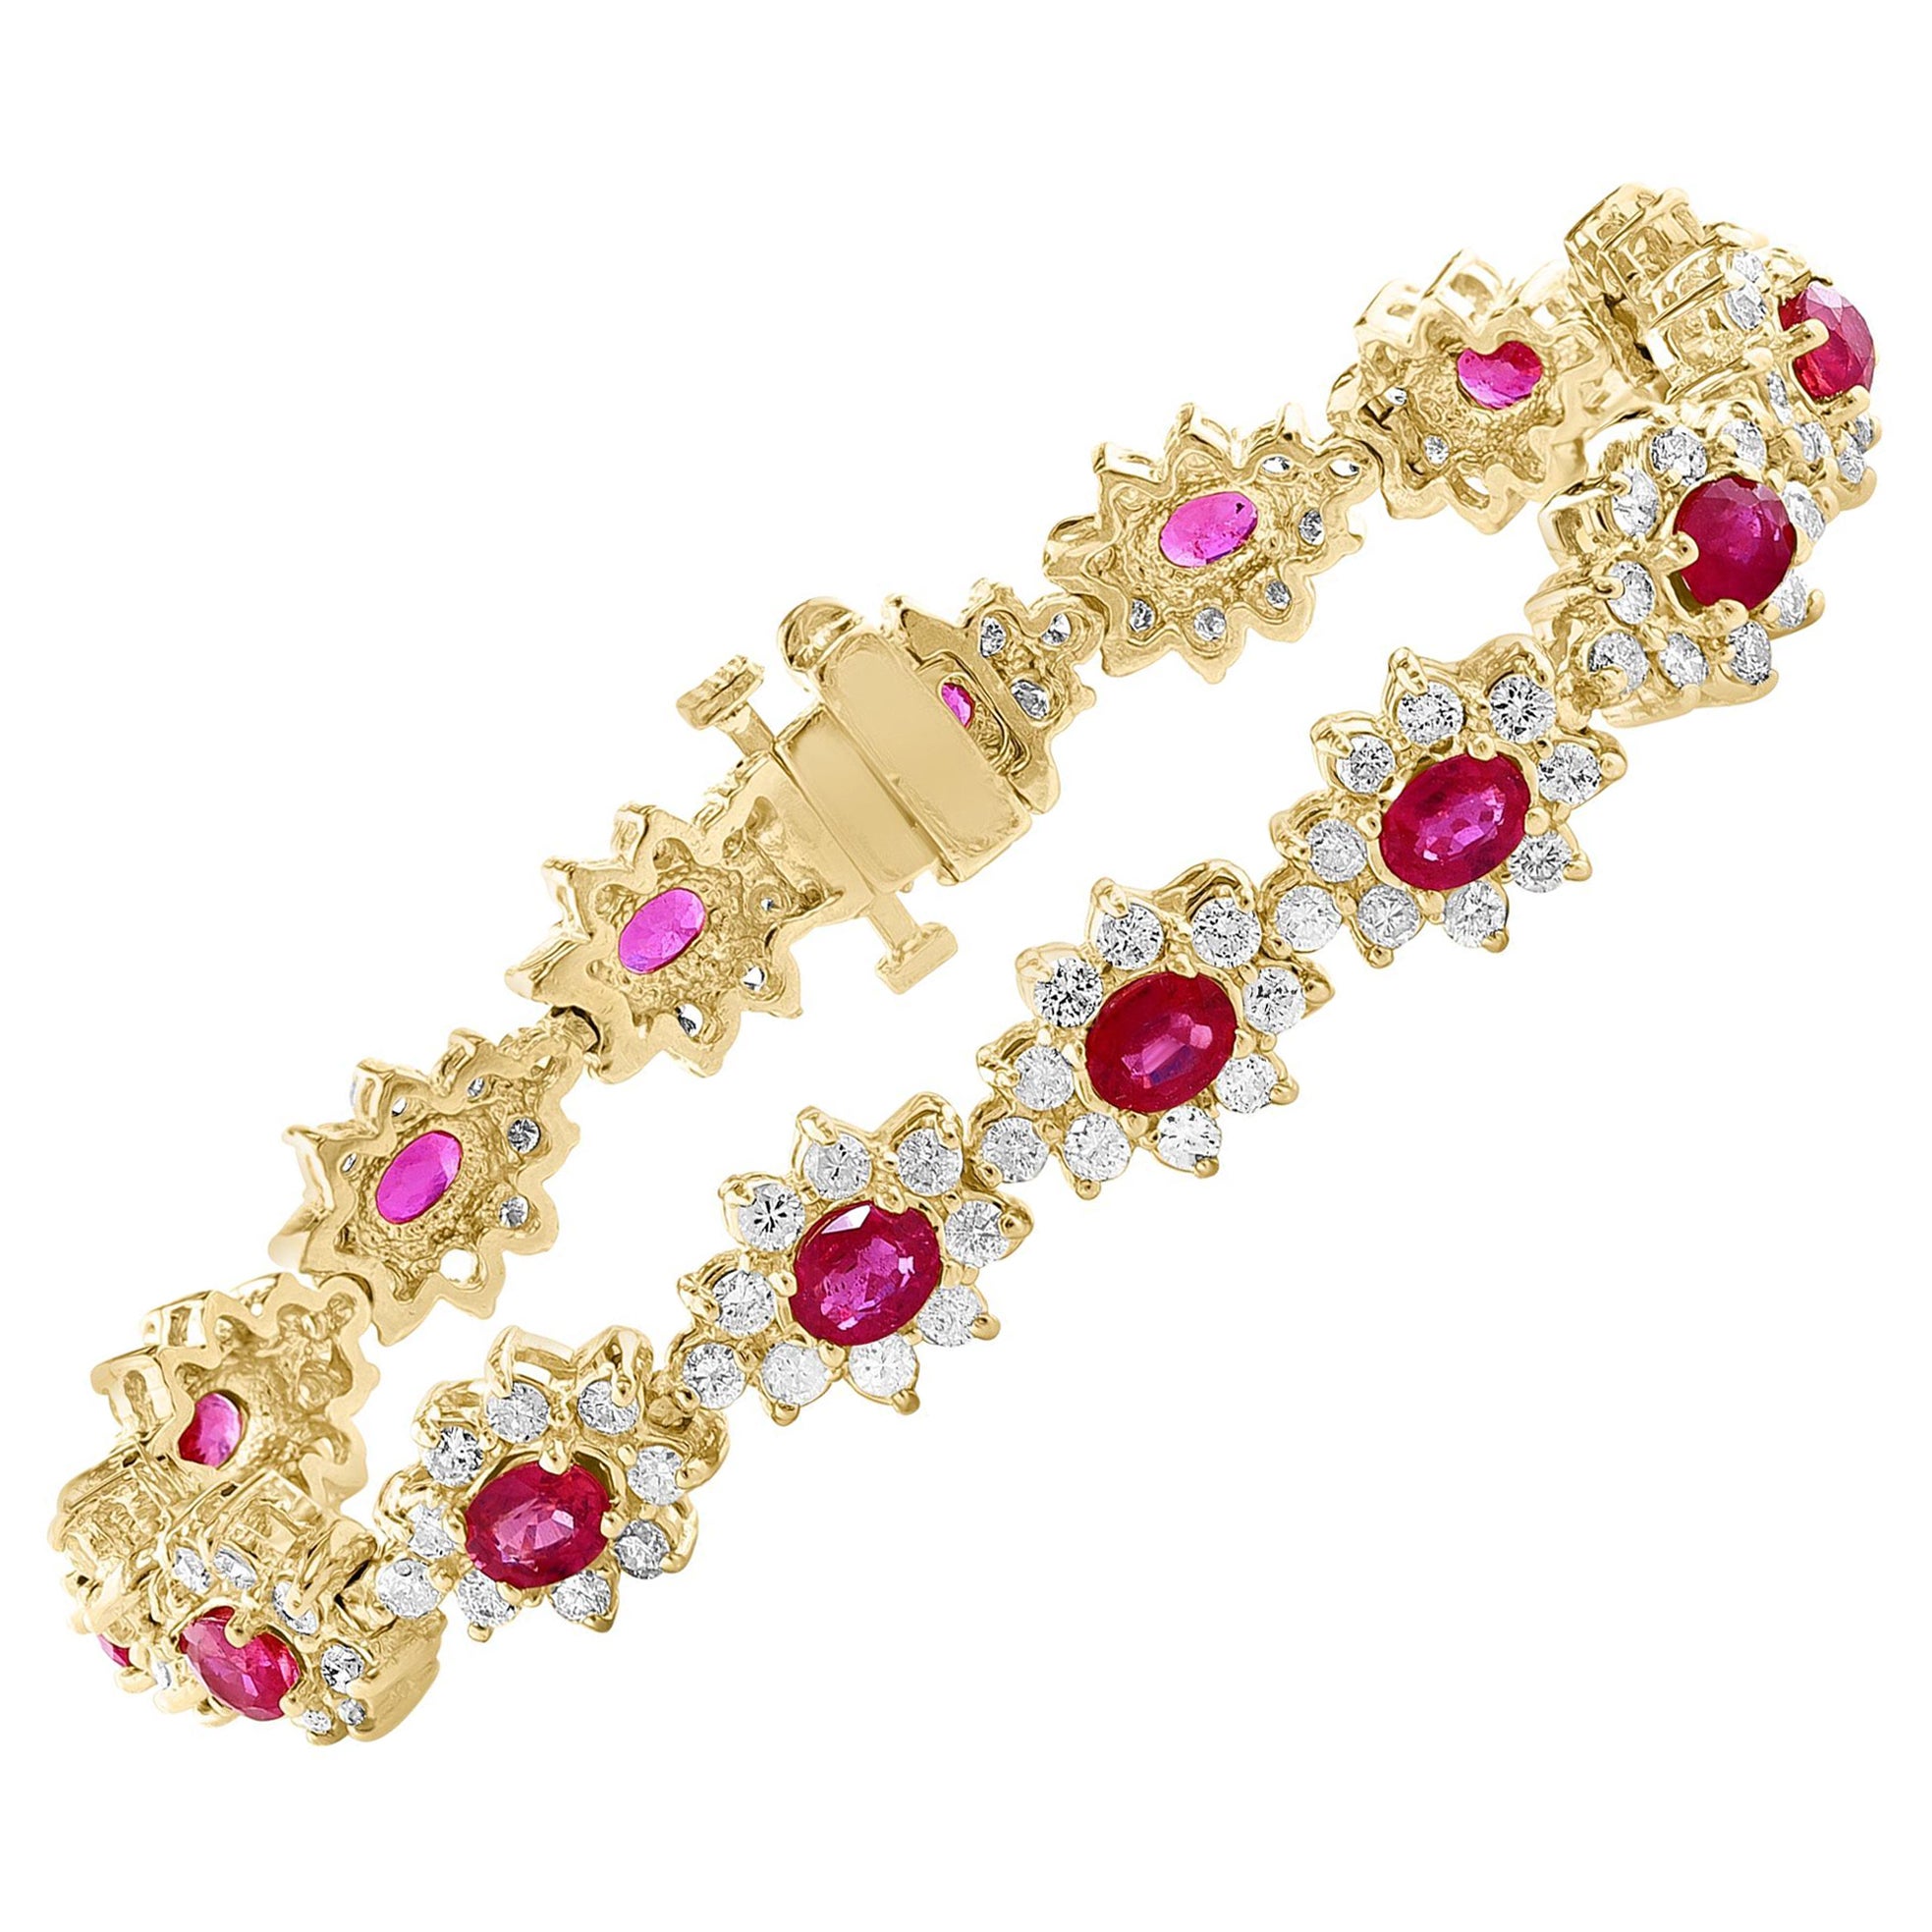 7 Carat Oval Cut Natural Ruby & Diamond Tennis Bracelet 14kt Yellow Gold 24.5 G For Sale